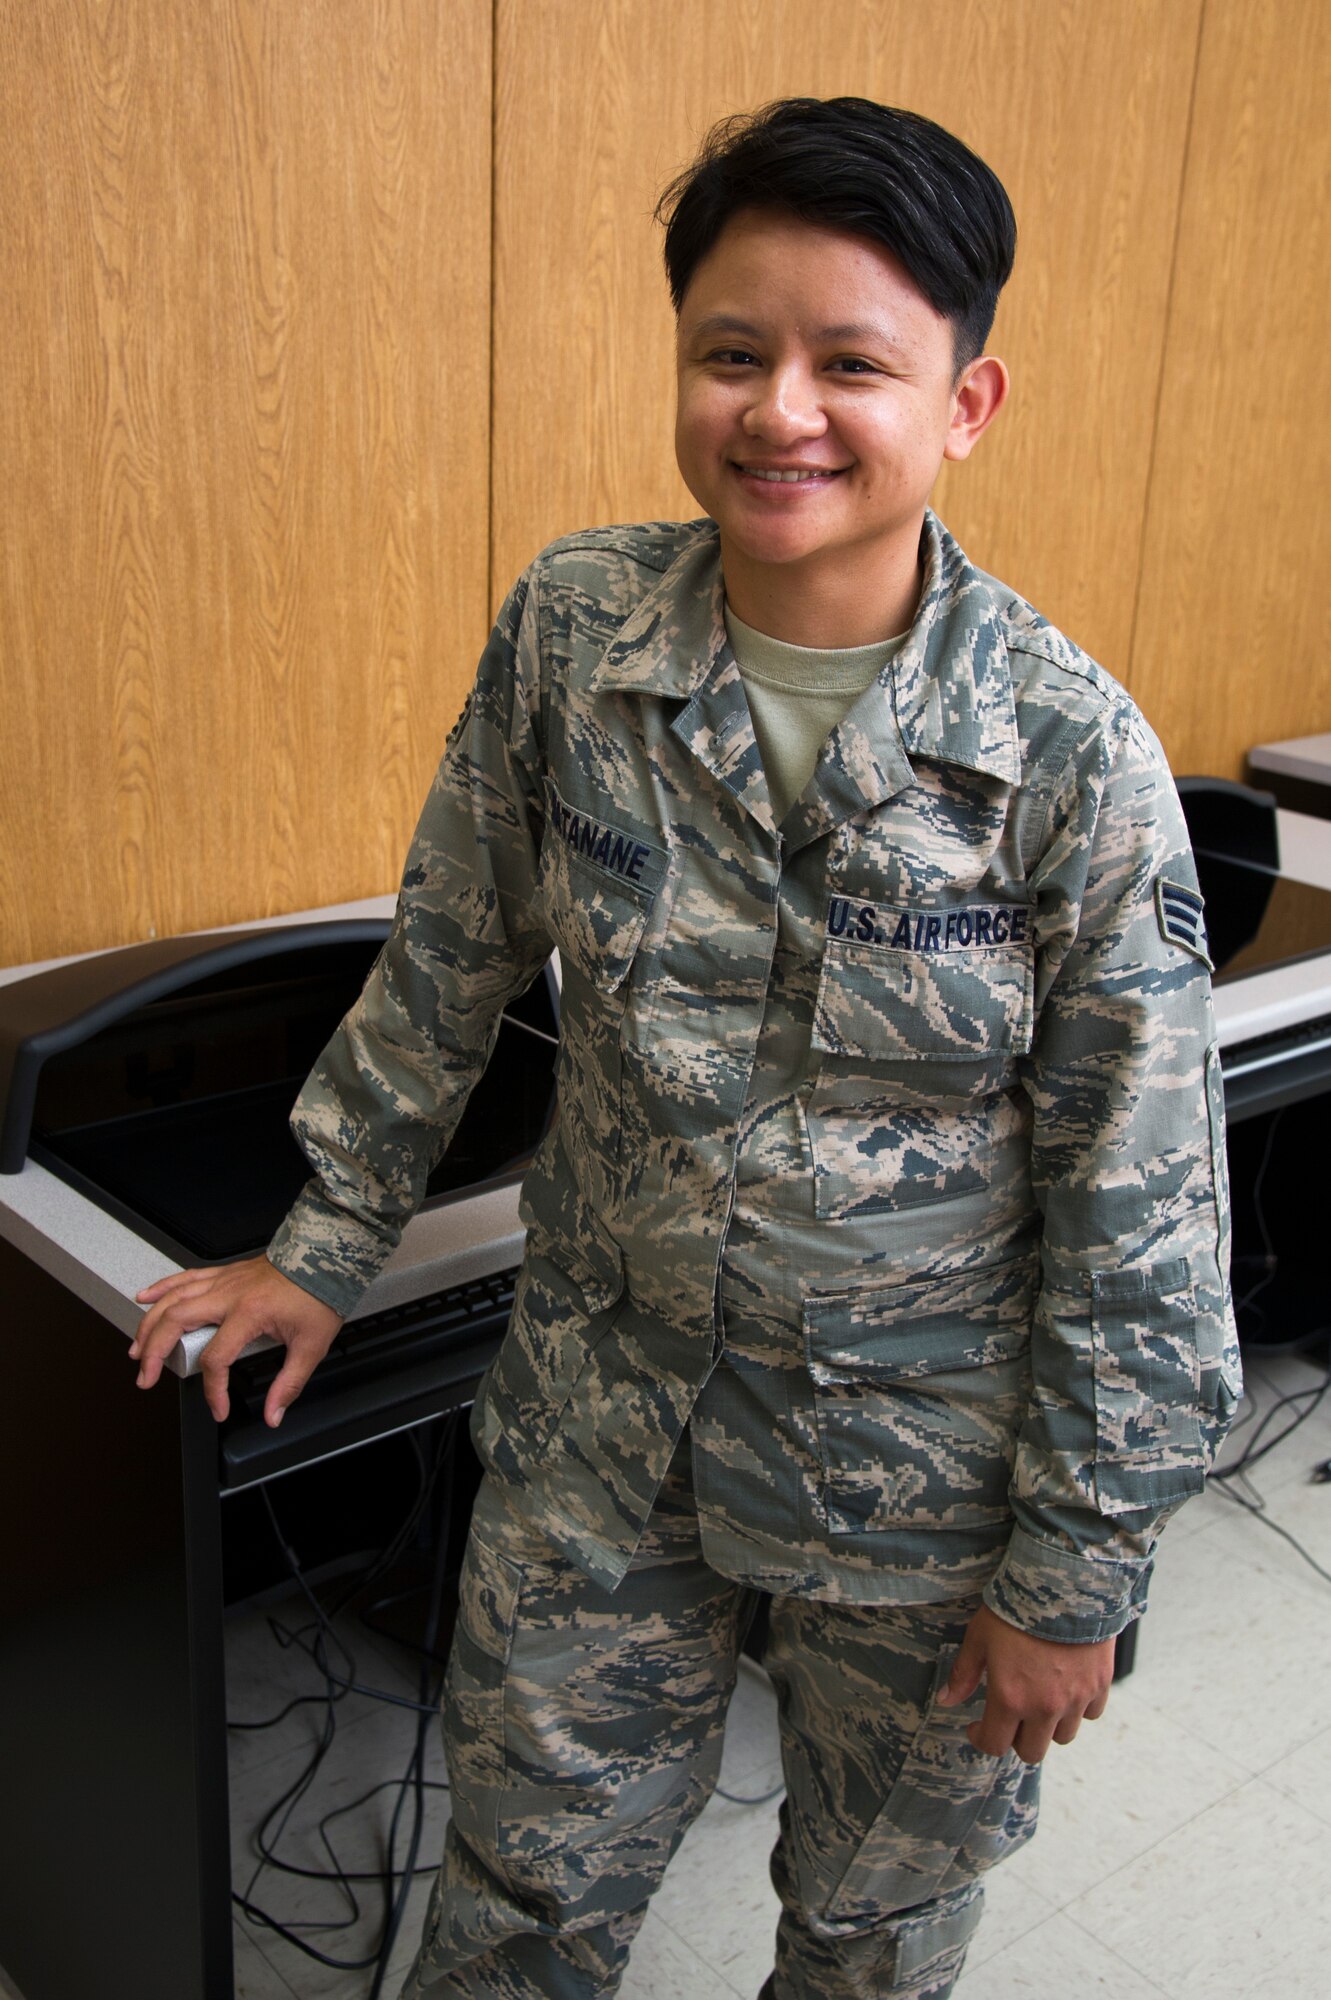 U.S. Air Force Senior Airman Jamie Matanane, a Reserve Citizen Airman with the 624th Regional Support Group Knowledge Operations Management alternate operating location in Guam, completes a rebuild for an outdated testing station by installing updated technology and equipment March 9, 2018, at Andersen Air Force Base, Guam. Five testing stations, which are used for individual Professional Military Education and career field upgrade testing, were rebuilt and restored to improve 624th RSG Test Control Office capabilities and sustainability for Reserve Citizen Airmen in Guam. (U.S. Air Force photo by Jerry R. Bynum)